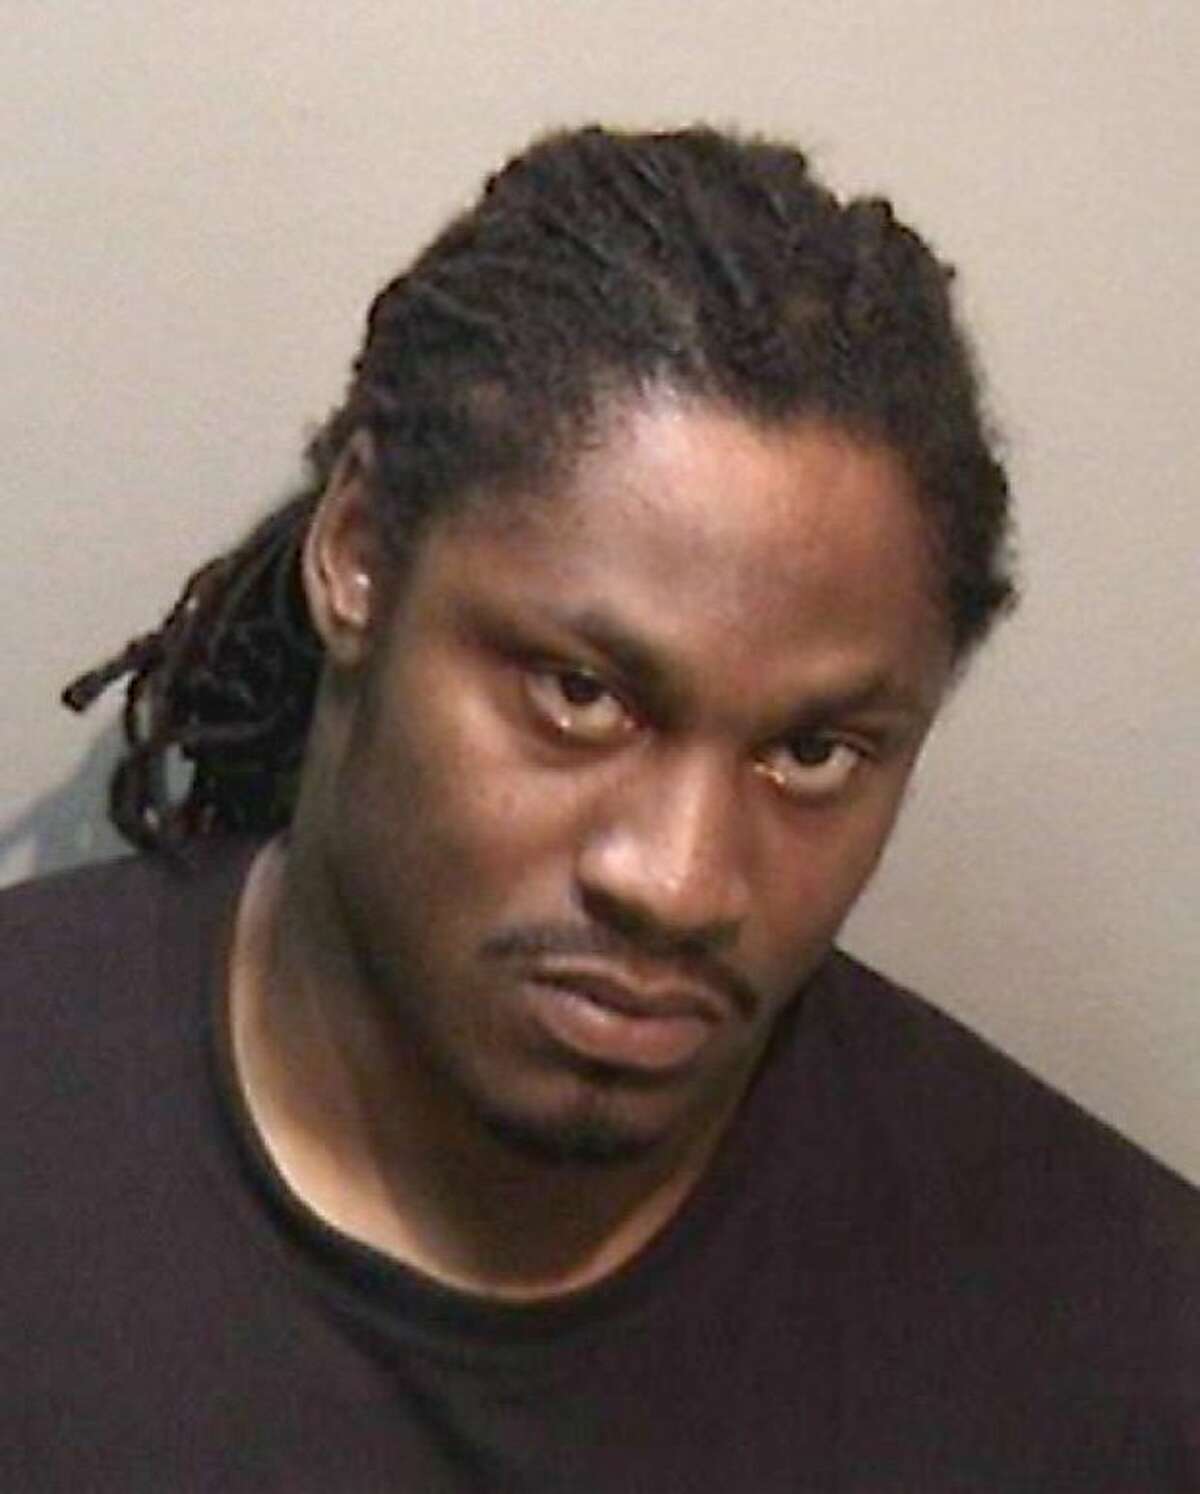 Marshawn Lynch was arrested on suspicion of a DUI on July 14, 2012, in Oakland.